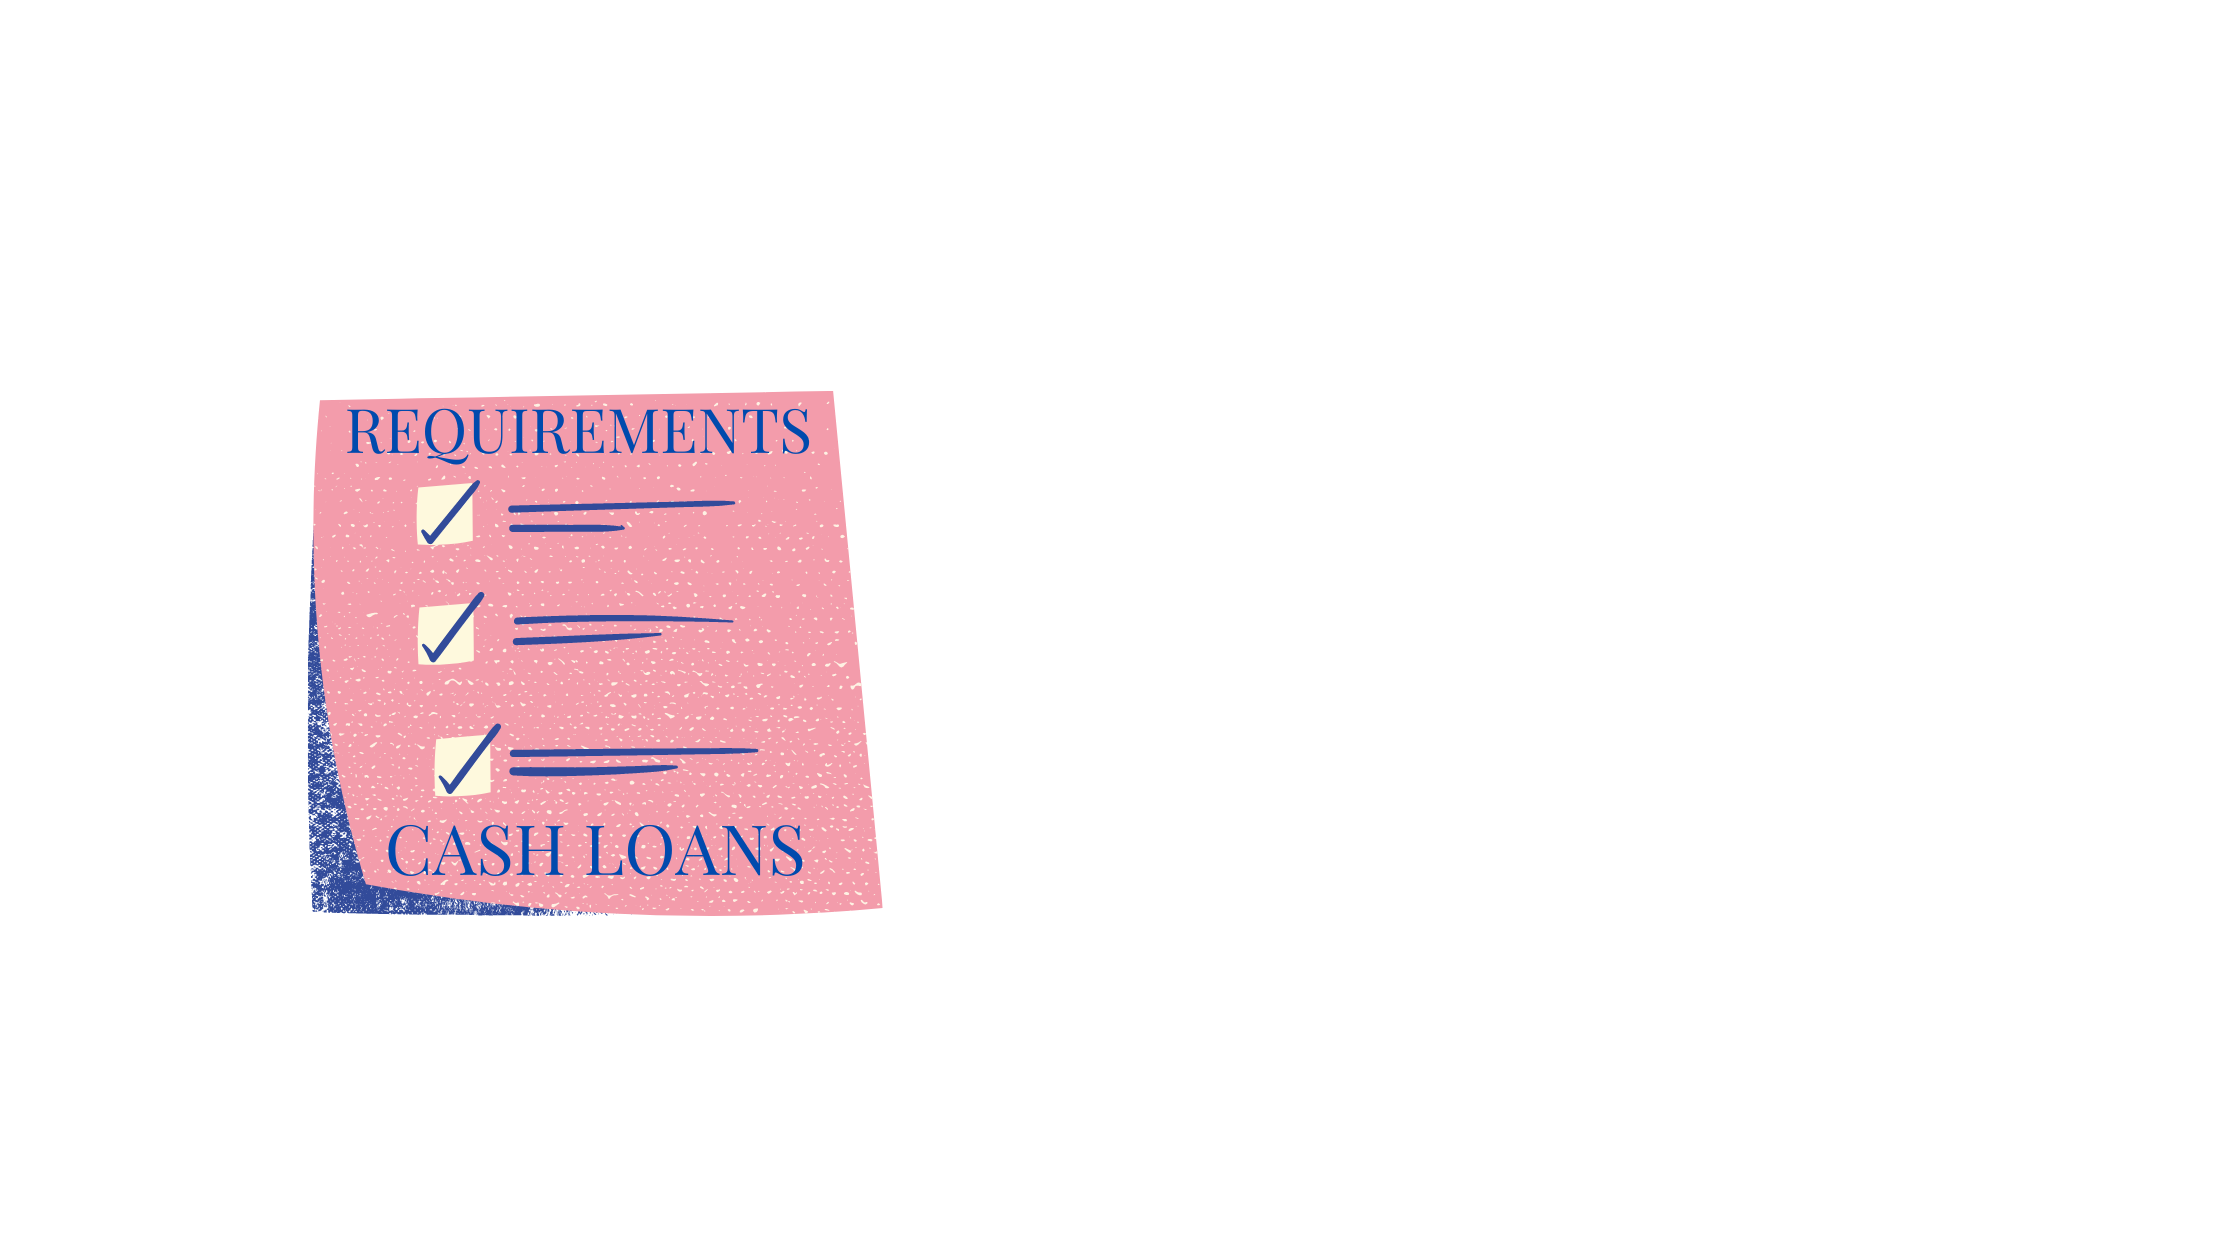 Cash Loan Requirments for a Business Loan from Sunwise Capital